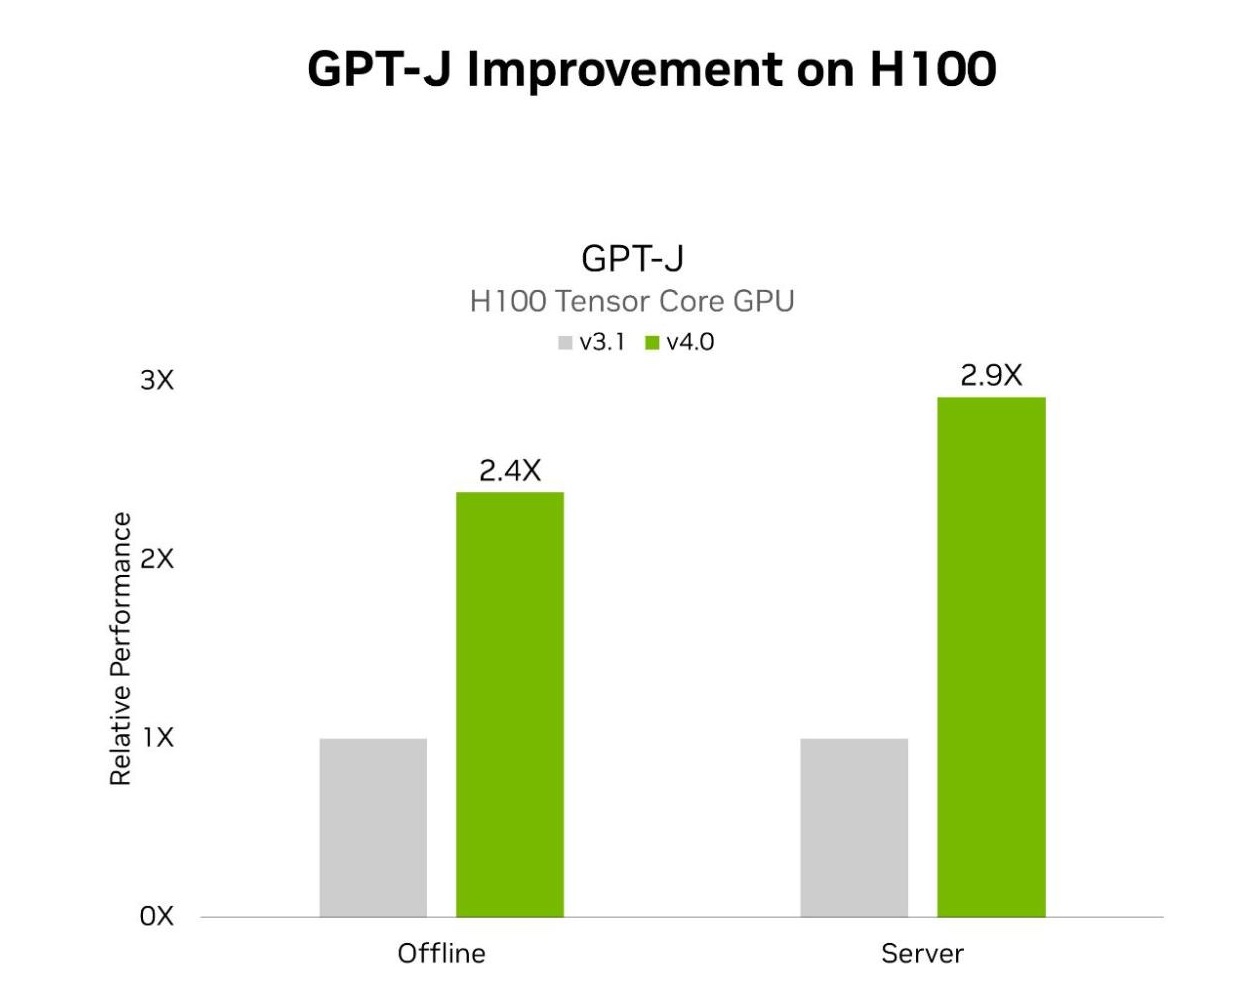 A chart showing the performance increases on H100 GPUs in both the offline and server scenarios this round compared to the prior round. 